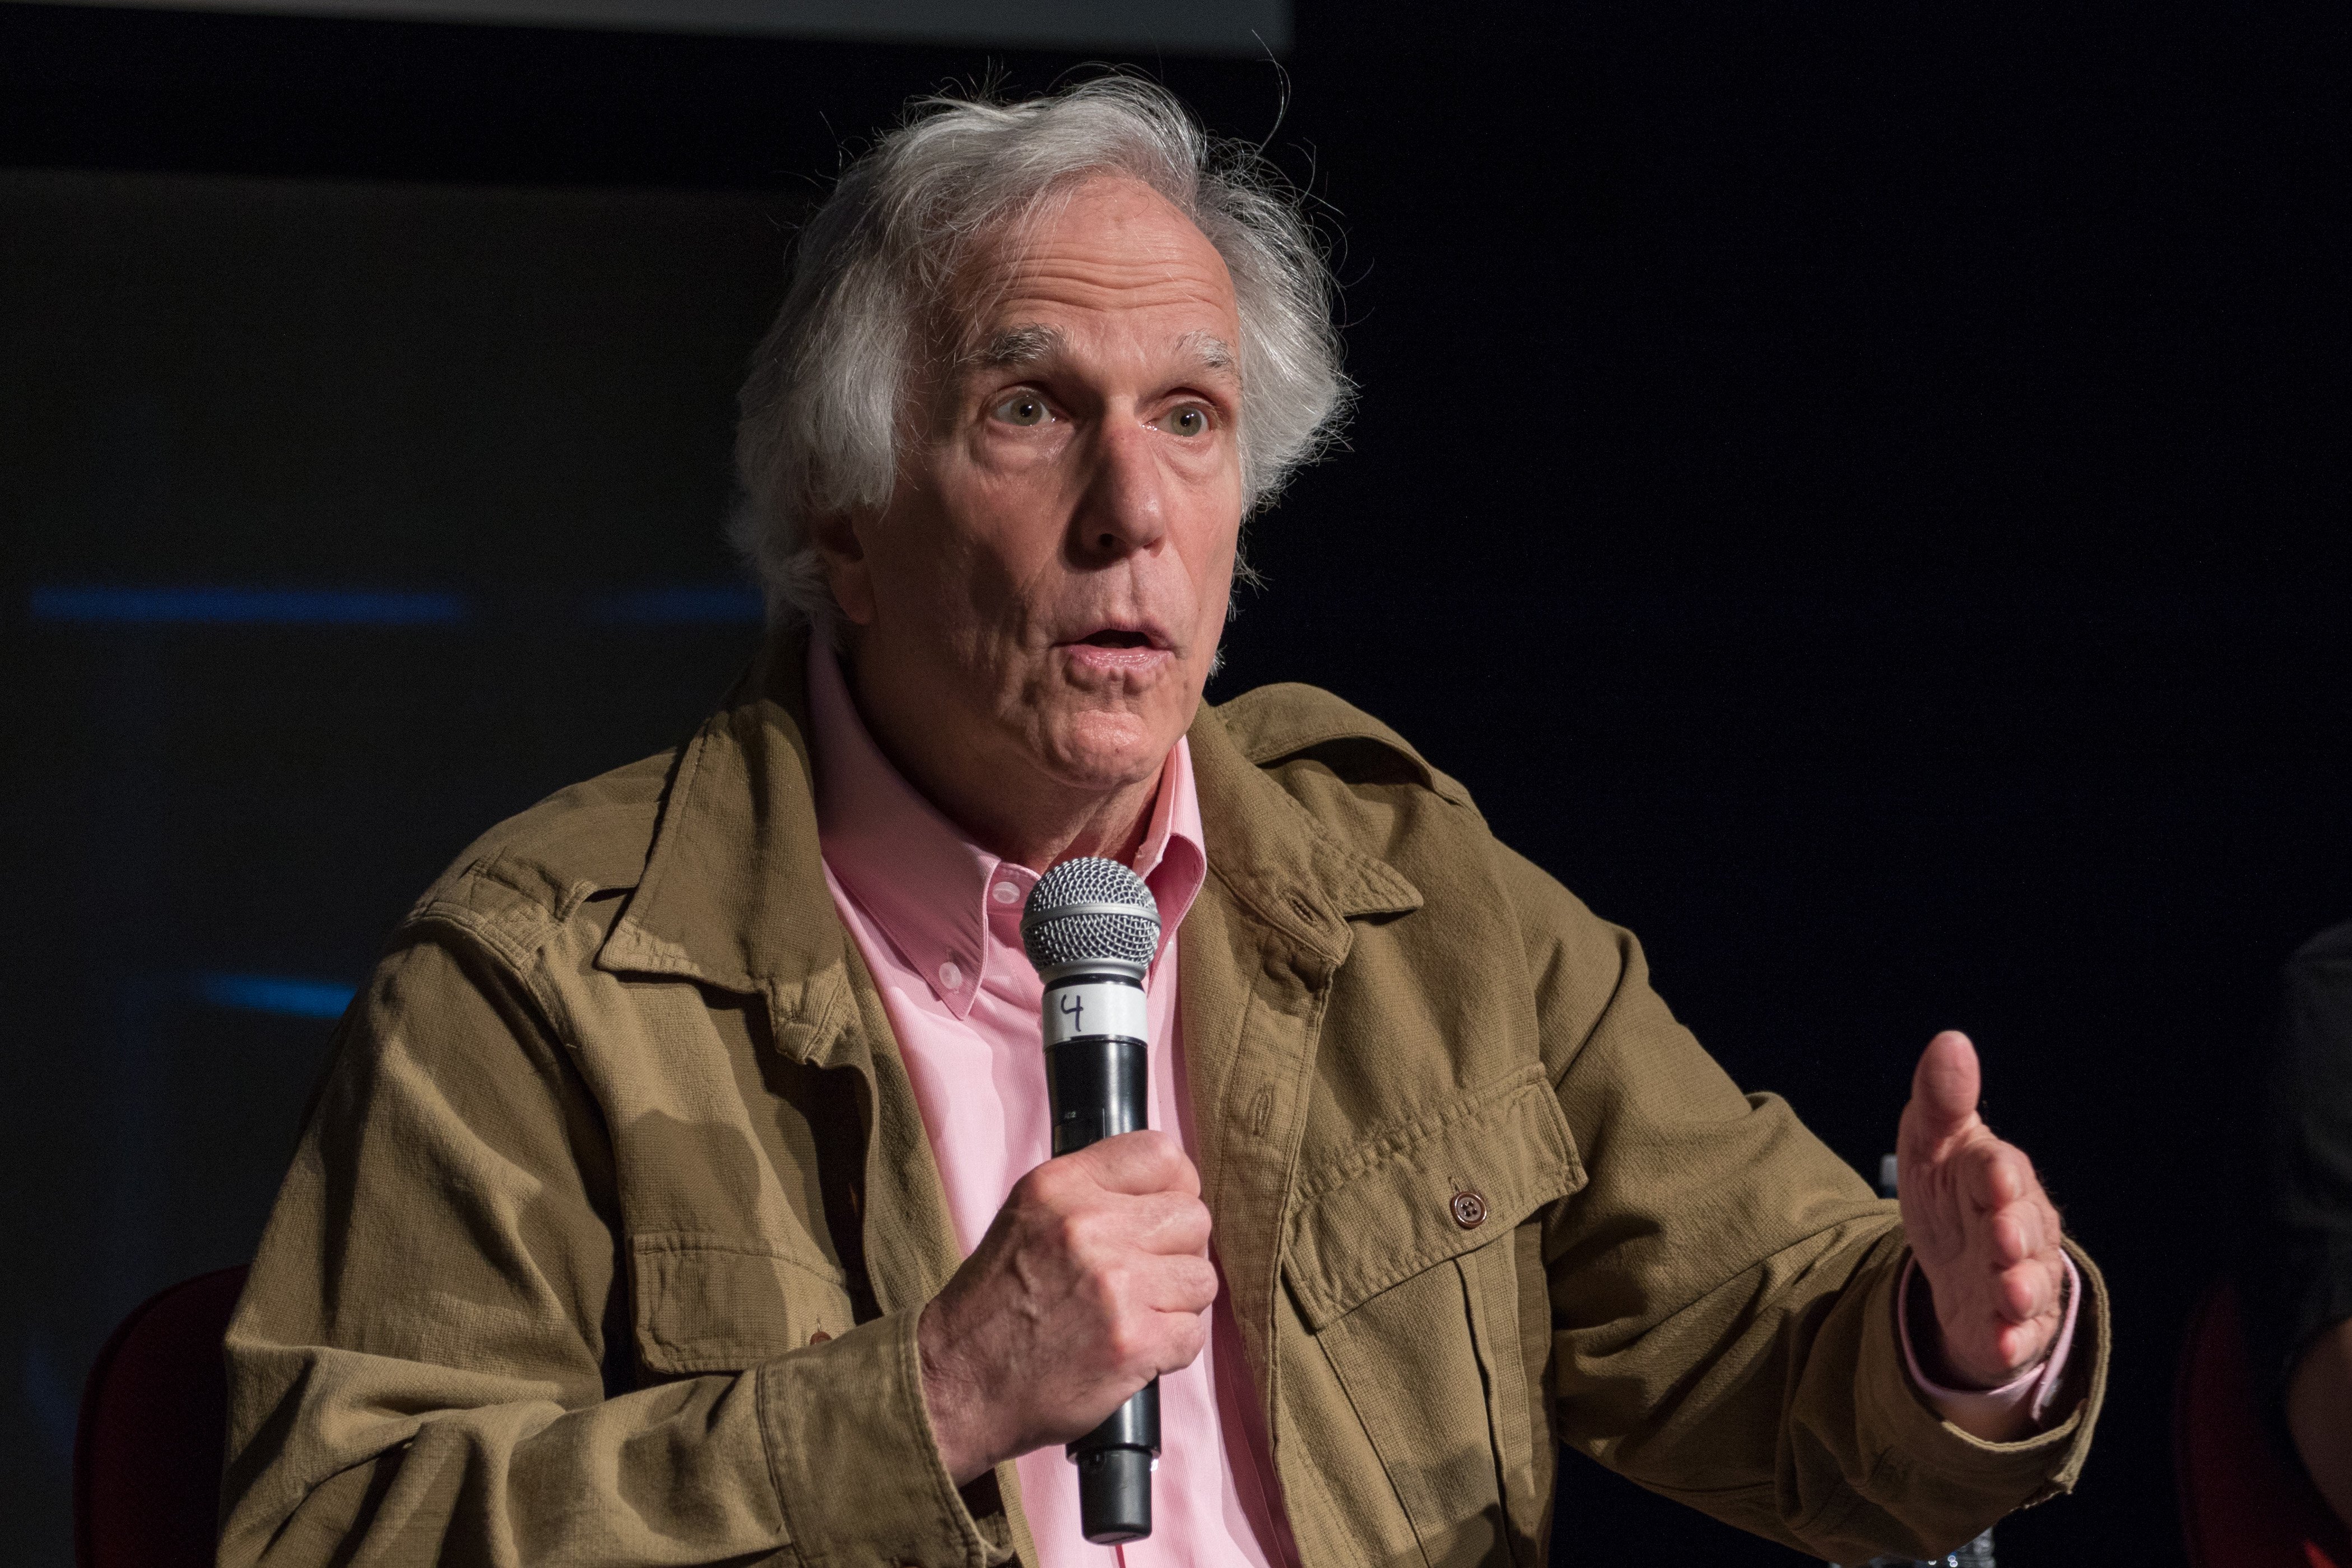 Henry Winkler attends "Barry: Sneak Peek and Cast Panel" during Moontower Just For Laughs at the State Theatre on April 22, 2022 in Austin, Texas. | Source: Getty Images